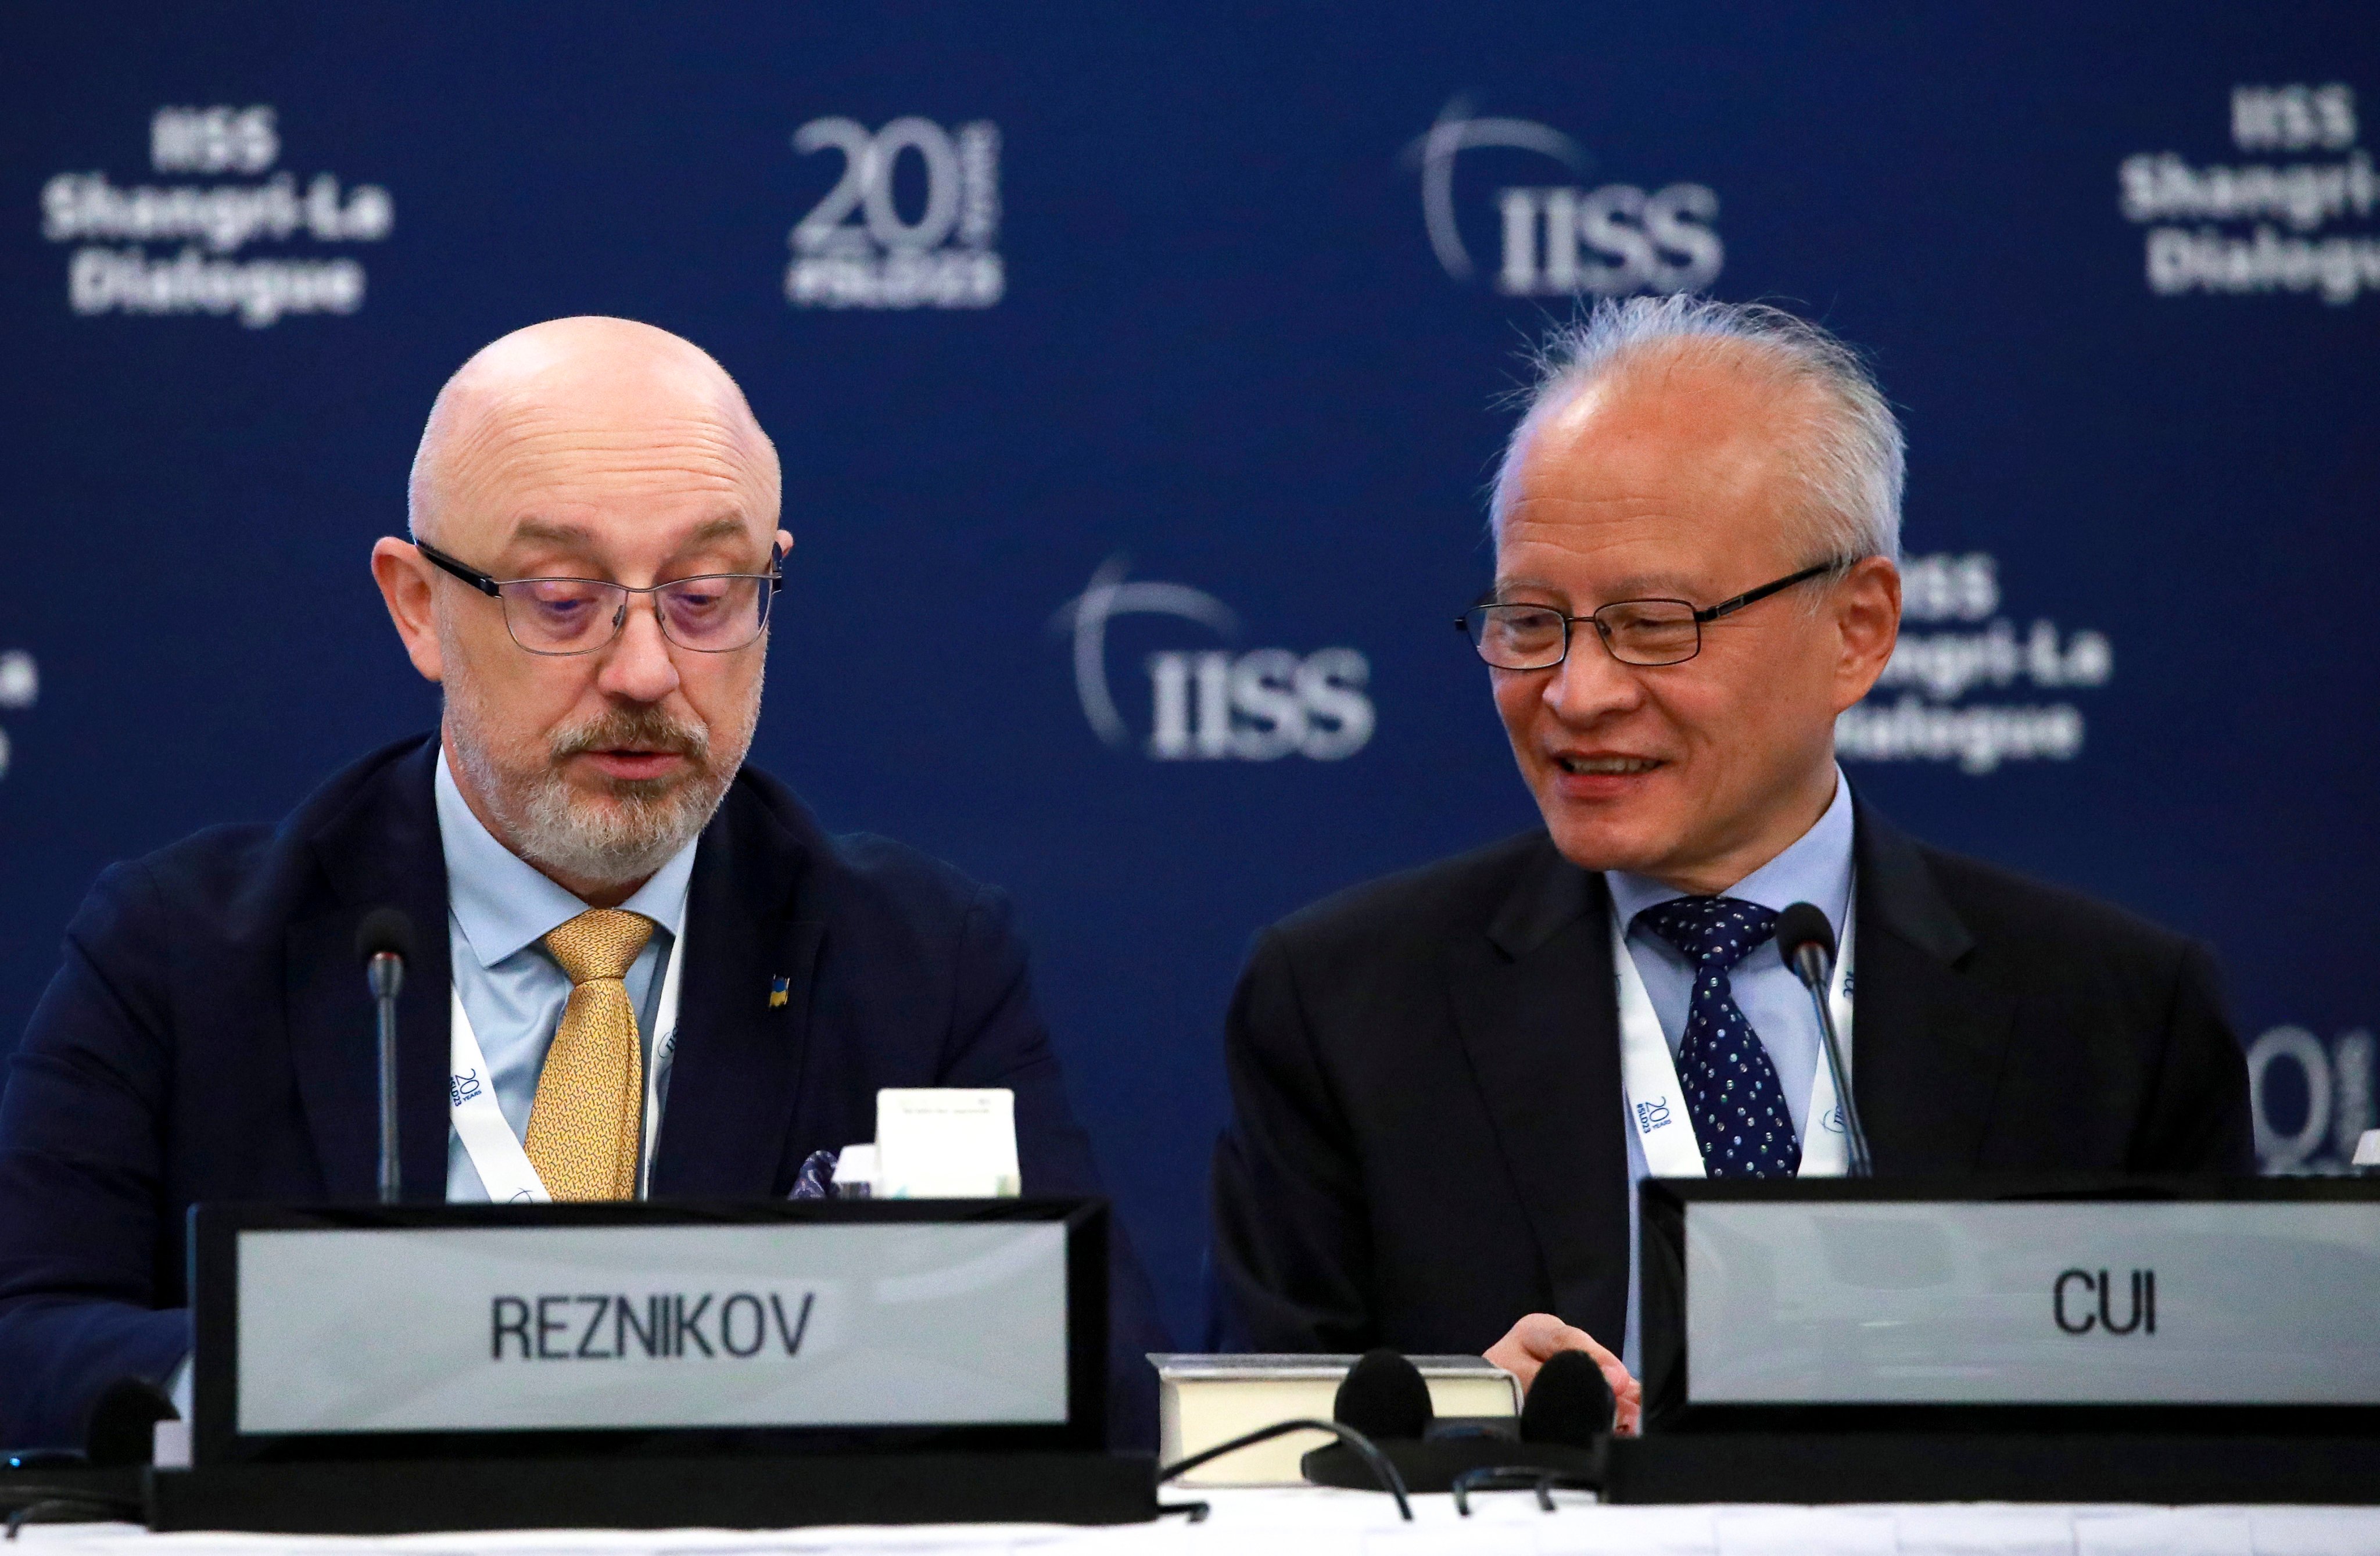 Cui Tiankai, former Chinese ambassador to the US, and Ukrainian Defence Minister Oleksii Reznikov ahead of a special session of the Shangri-la Dialogue in Singapore on Saturday. Photo: EPA-EFE